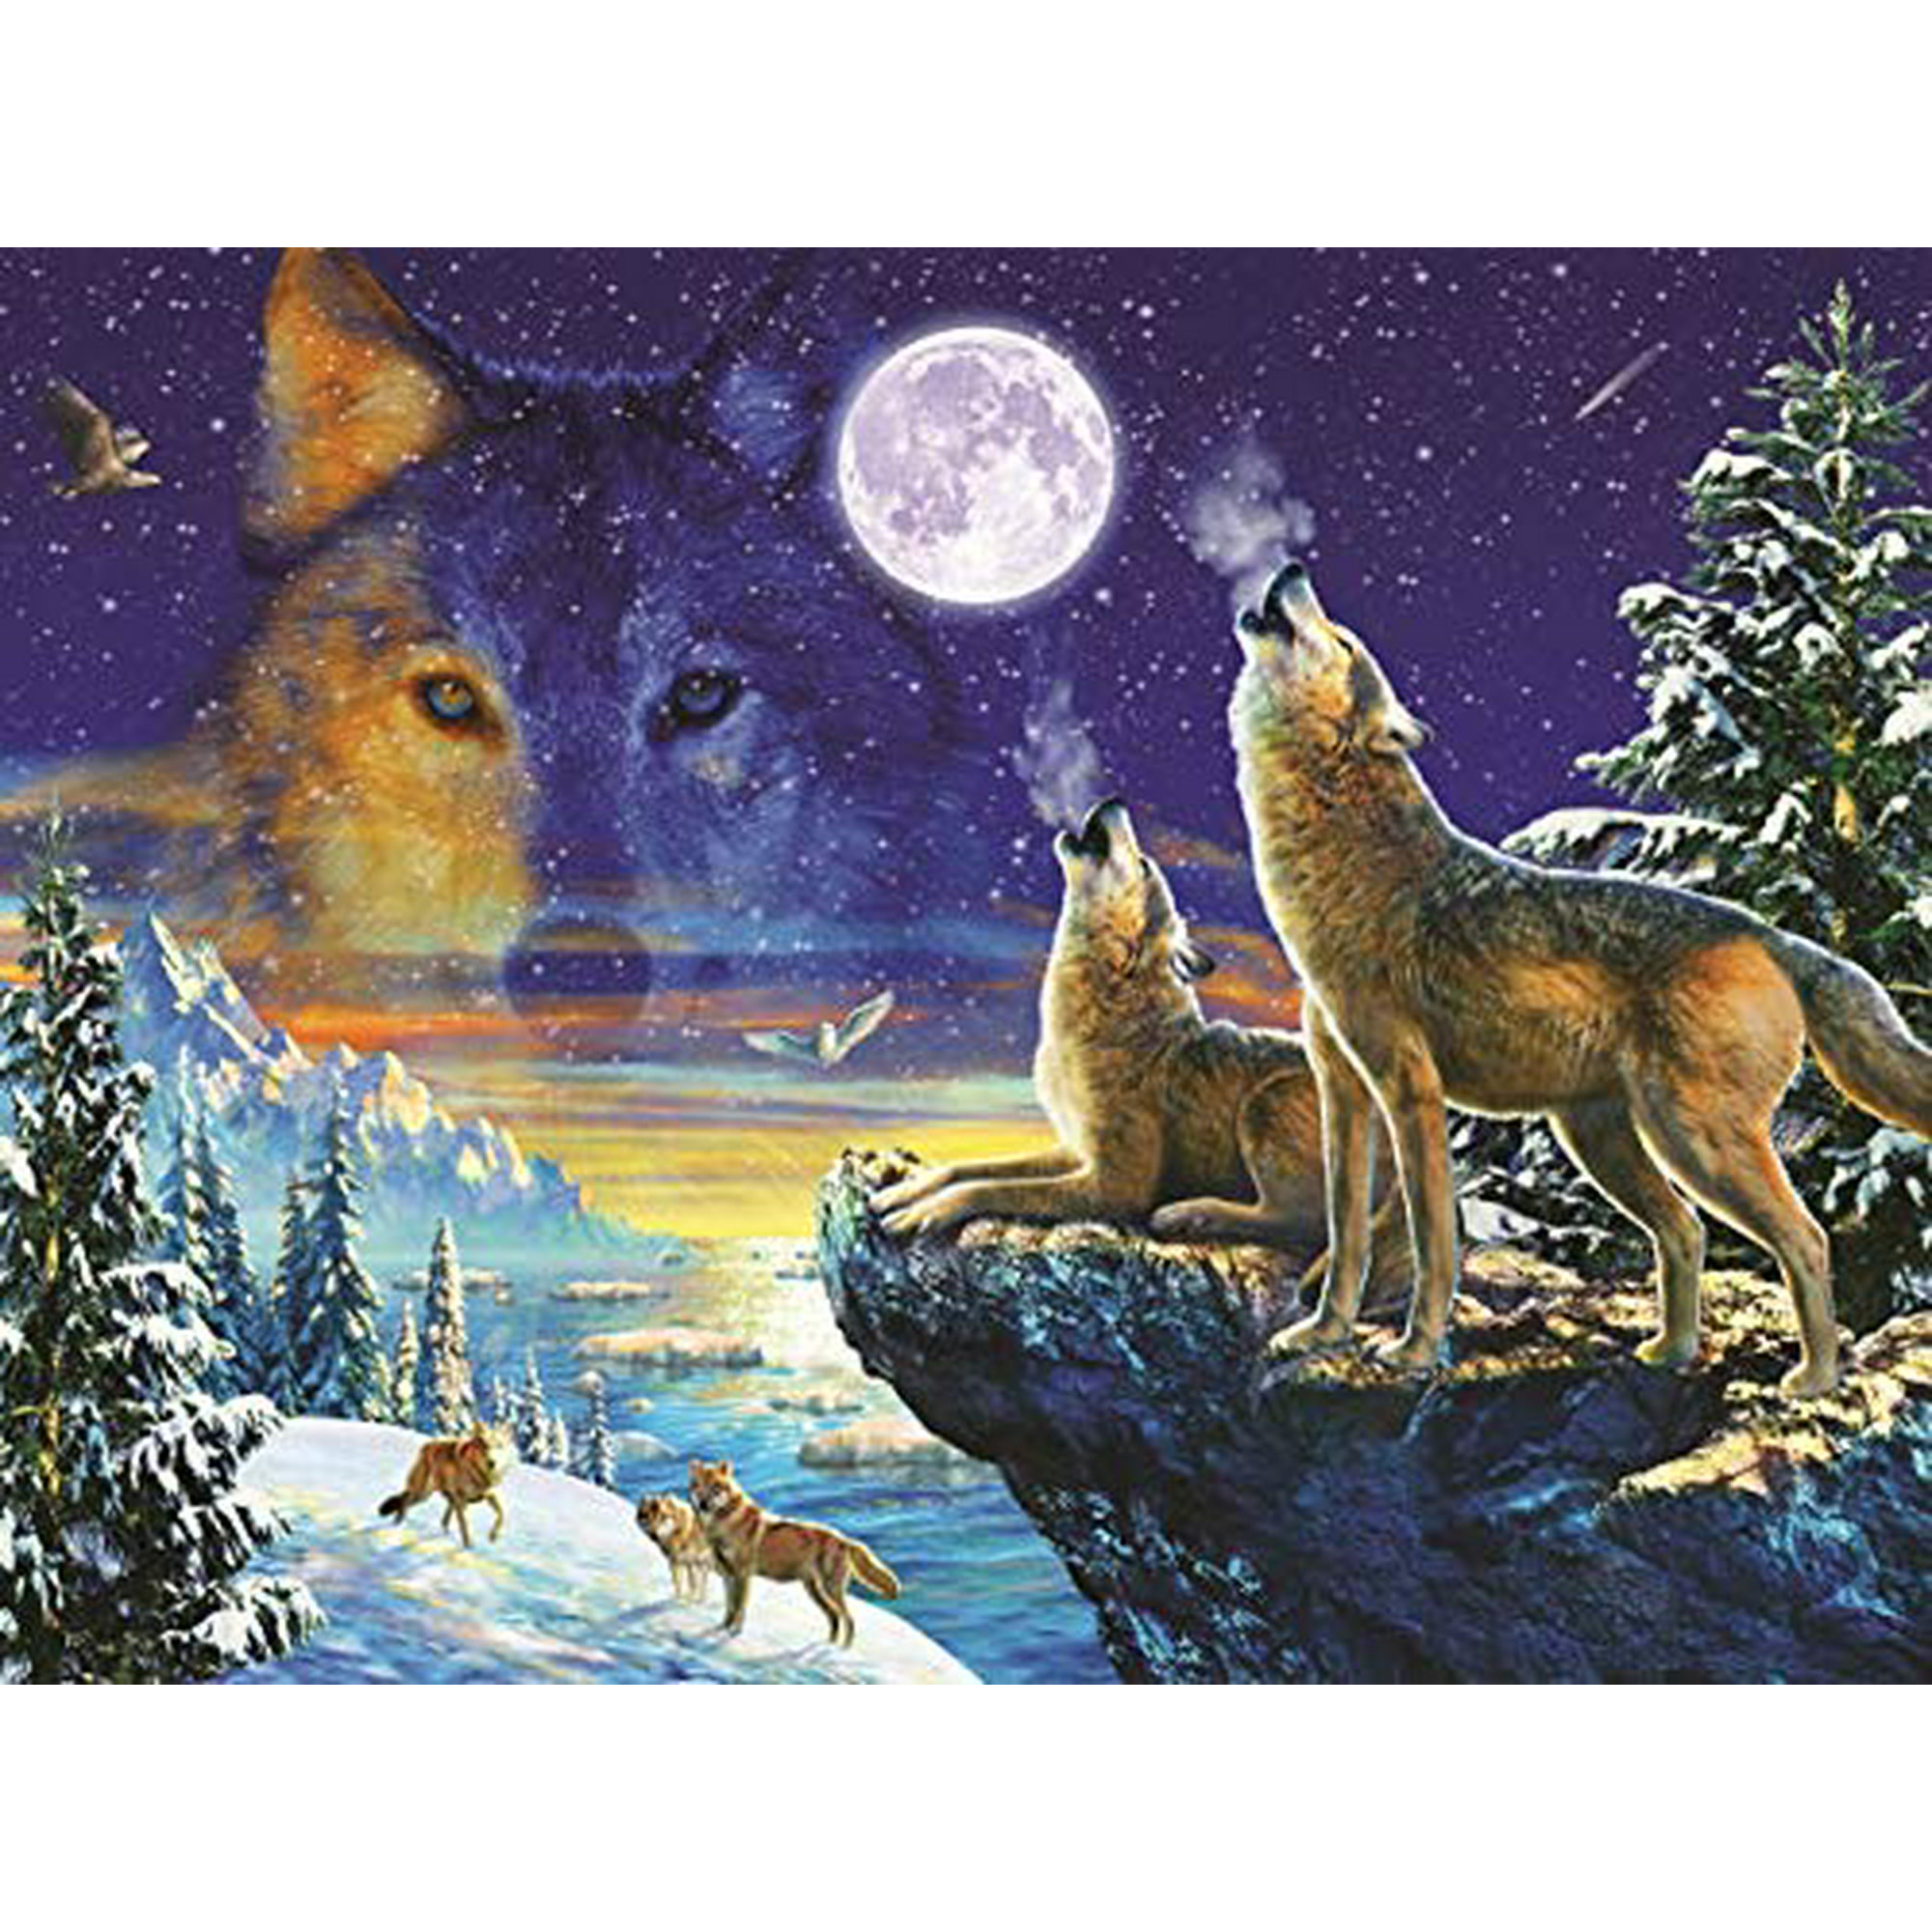 Howling Wolves 1000 pc Jigsaw Puzzle by SunsOut 